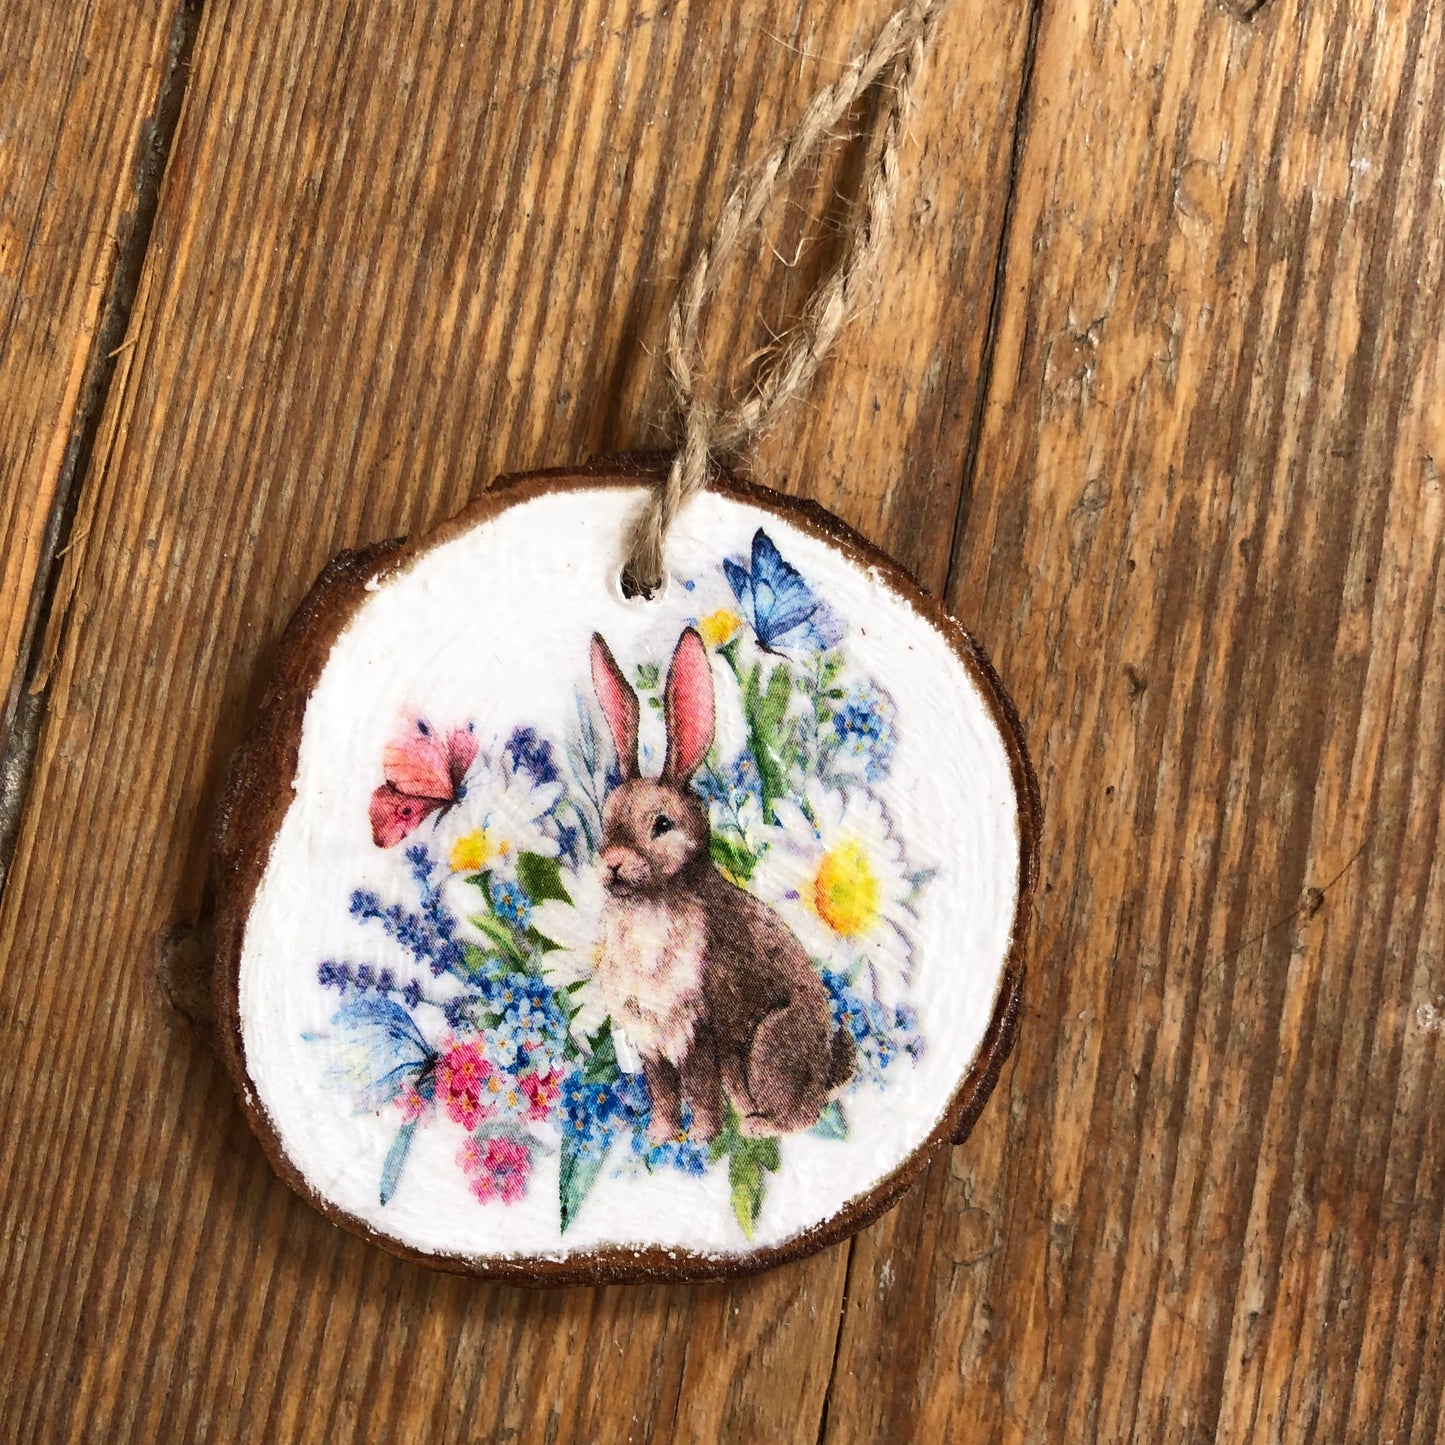 Cottage-core Rabbit Decorations on Natural Wood Slices